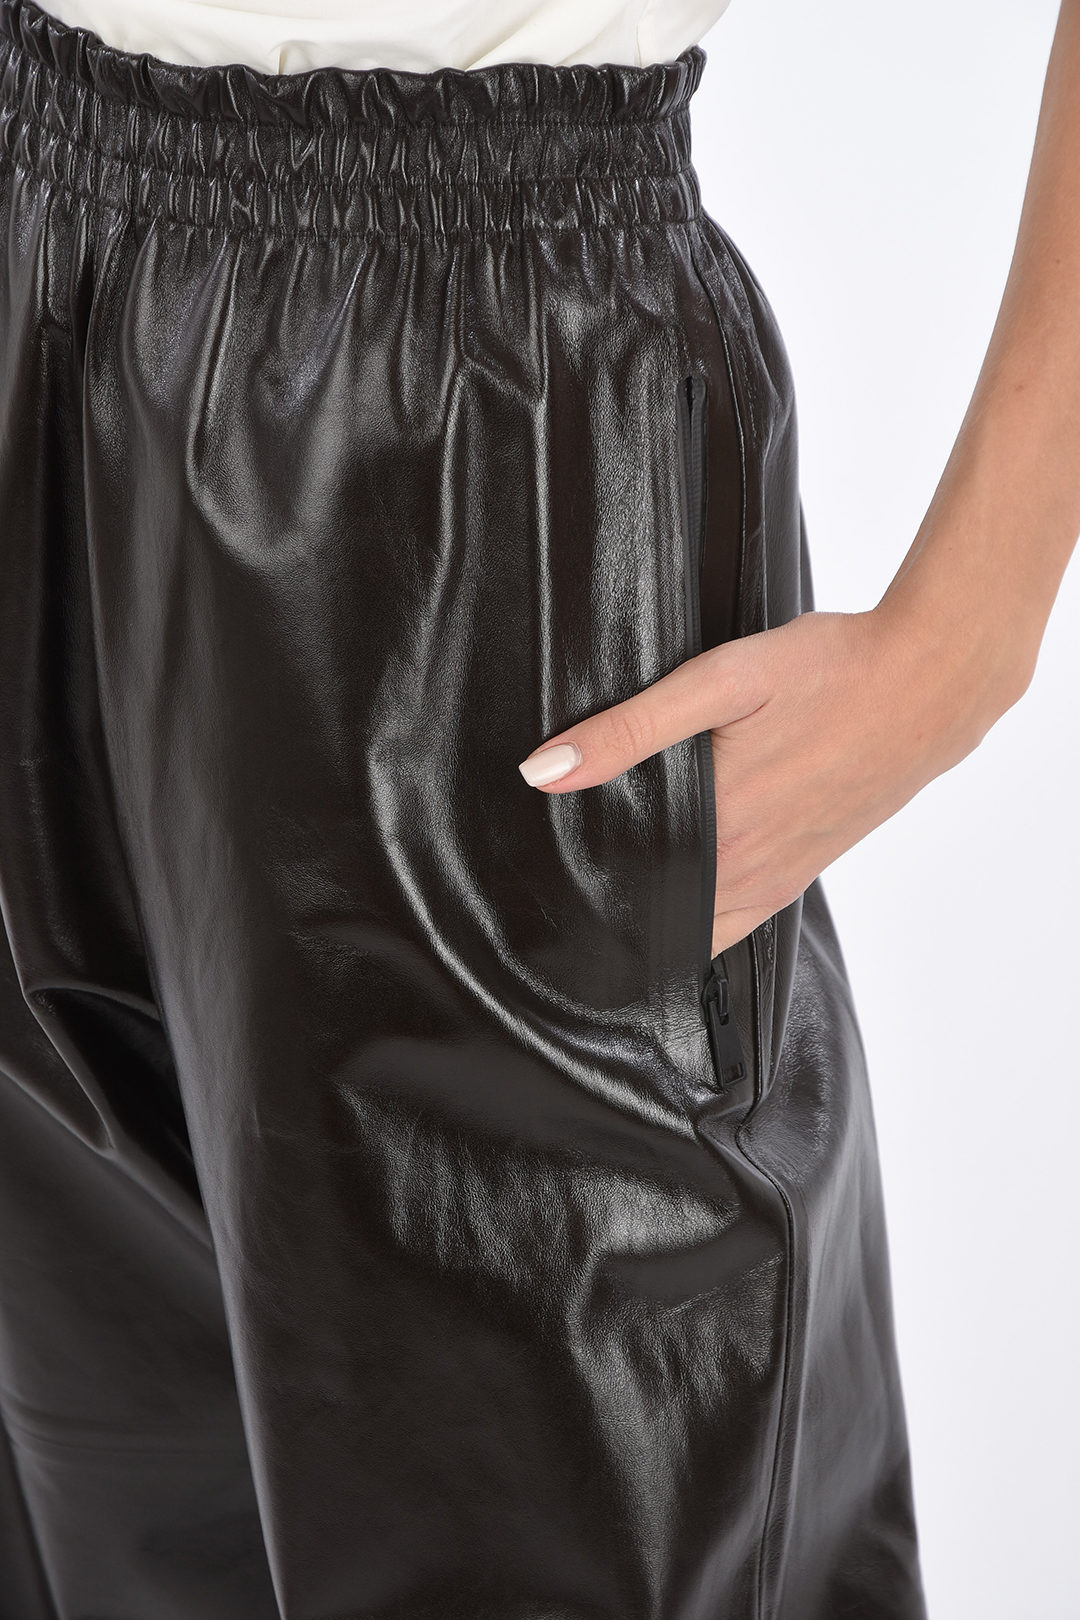 https://data.glamood.com/imgprodotto/shiny-leather-pants-with-waistband-and-ankle-velcro-detail_1056357_zoom.jpg